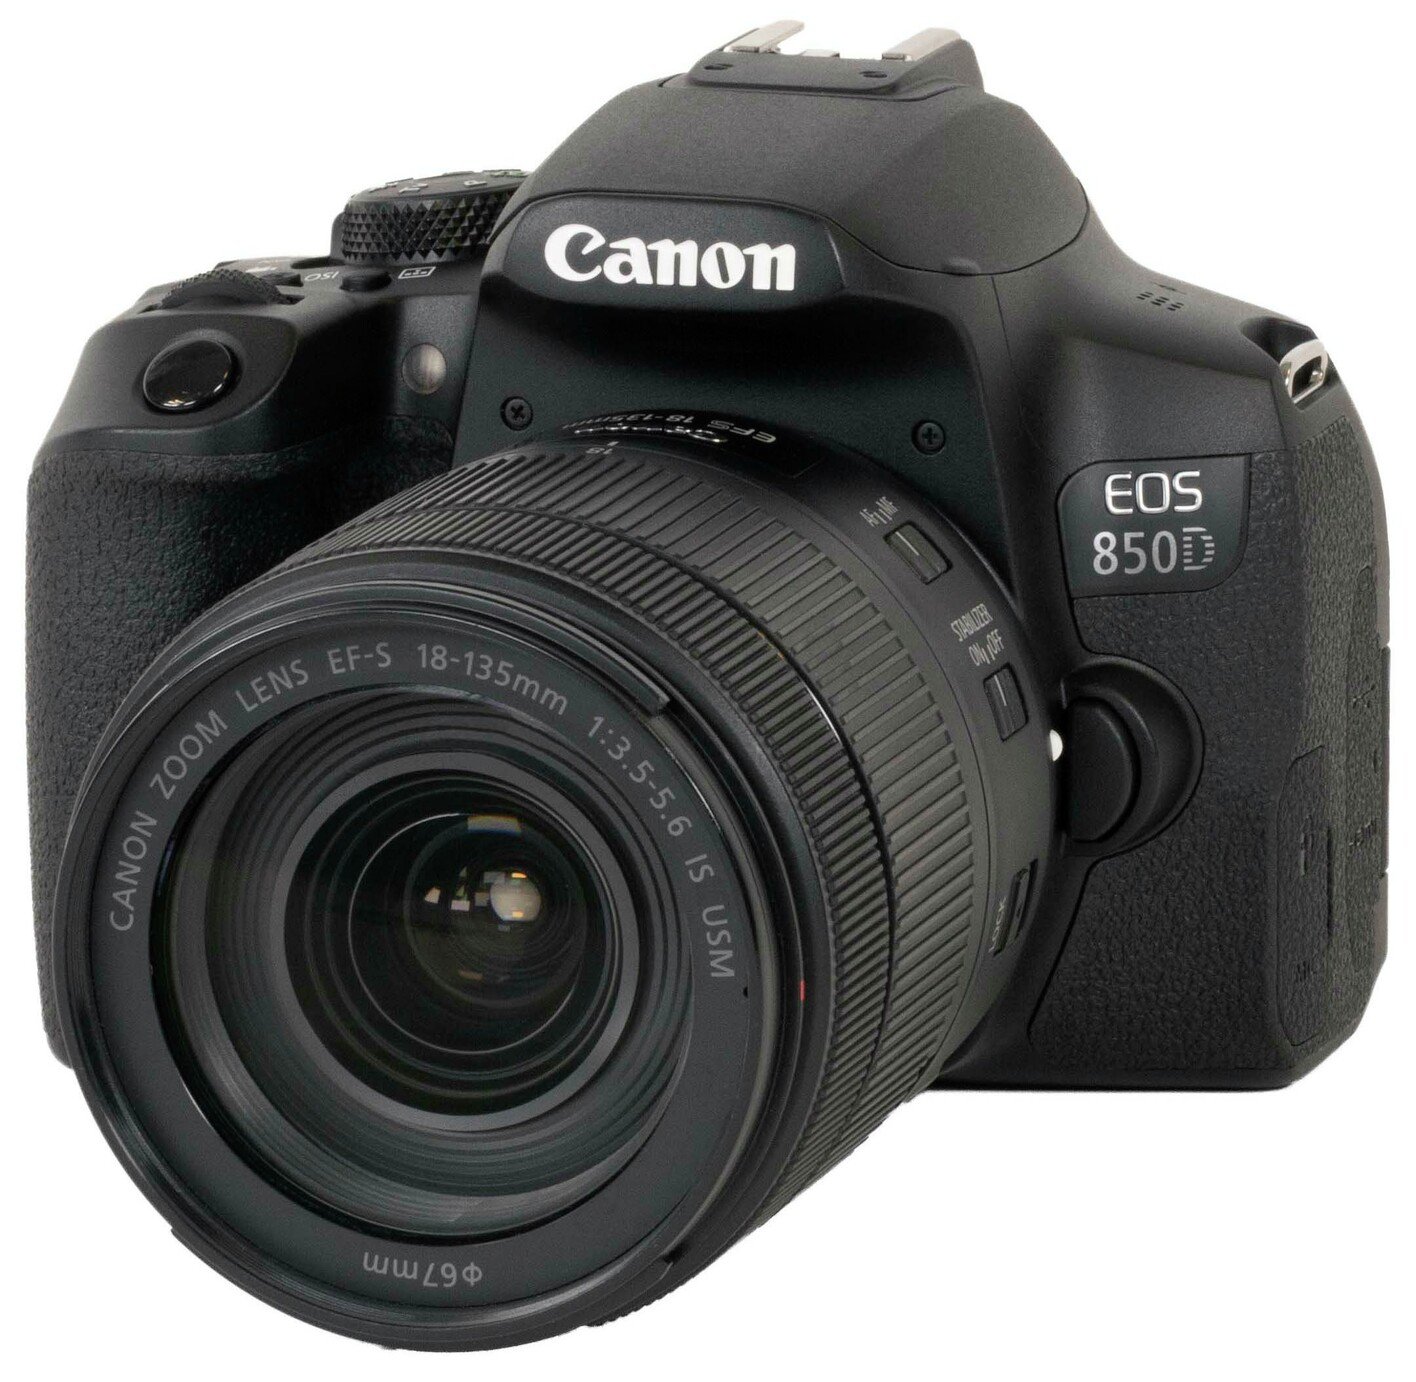 Canon EOS 850D 18-135mm Camera Kit Review